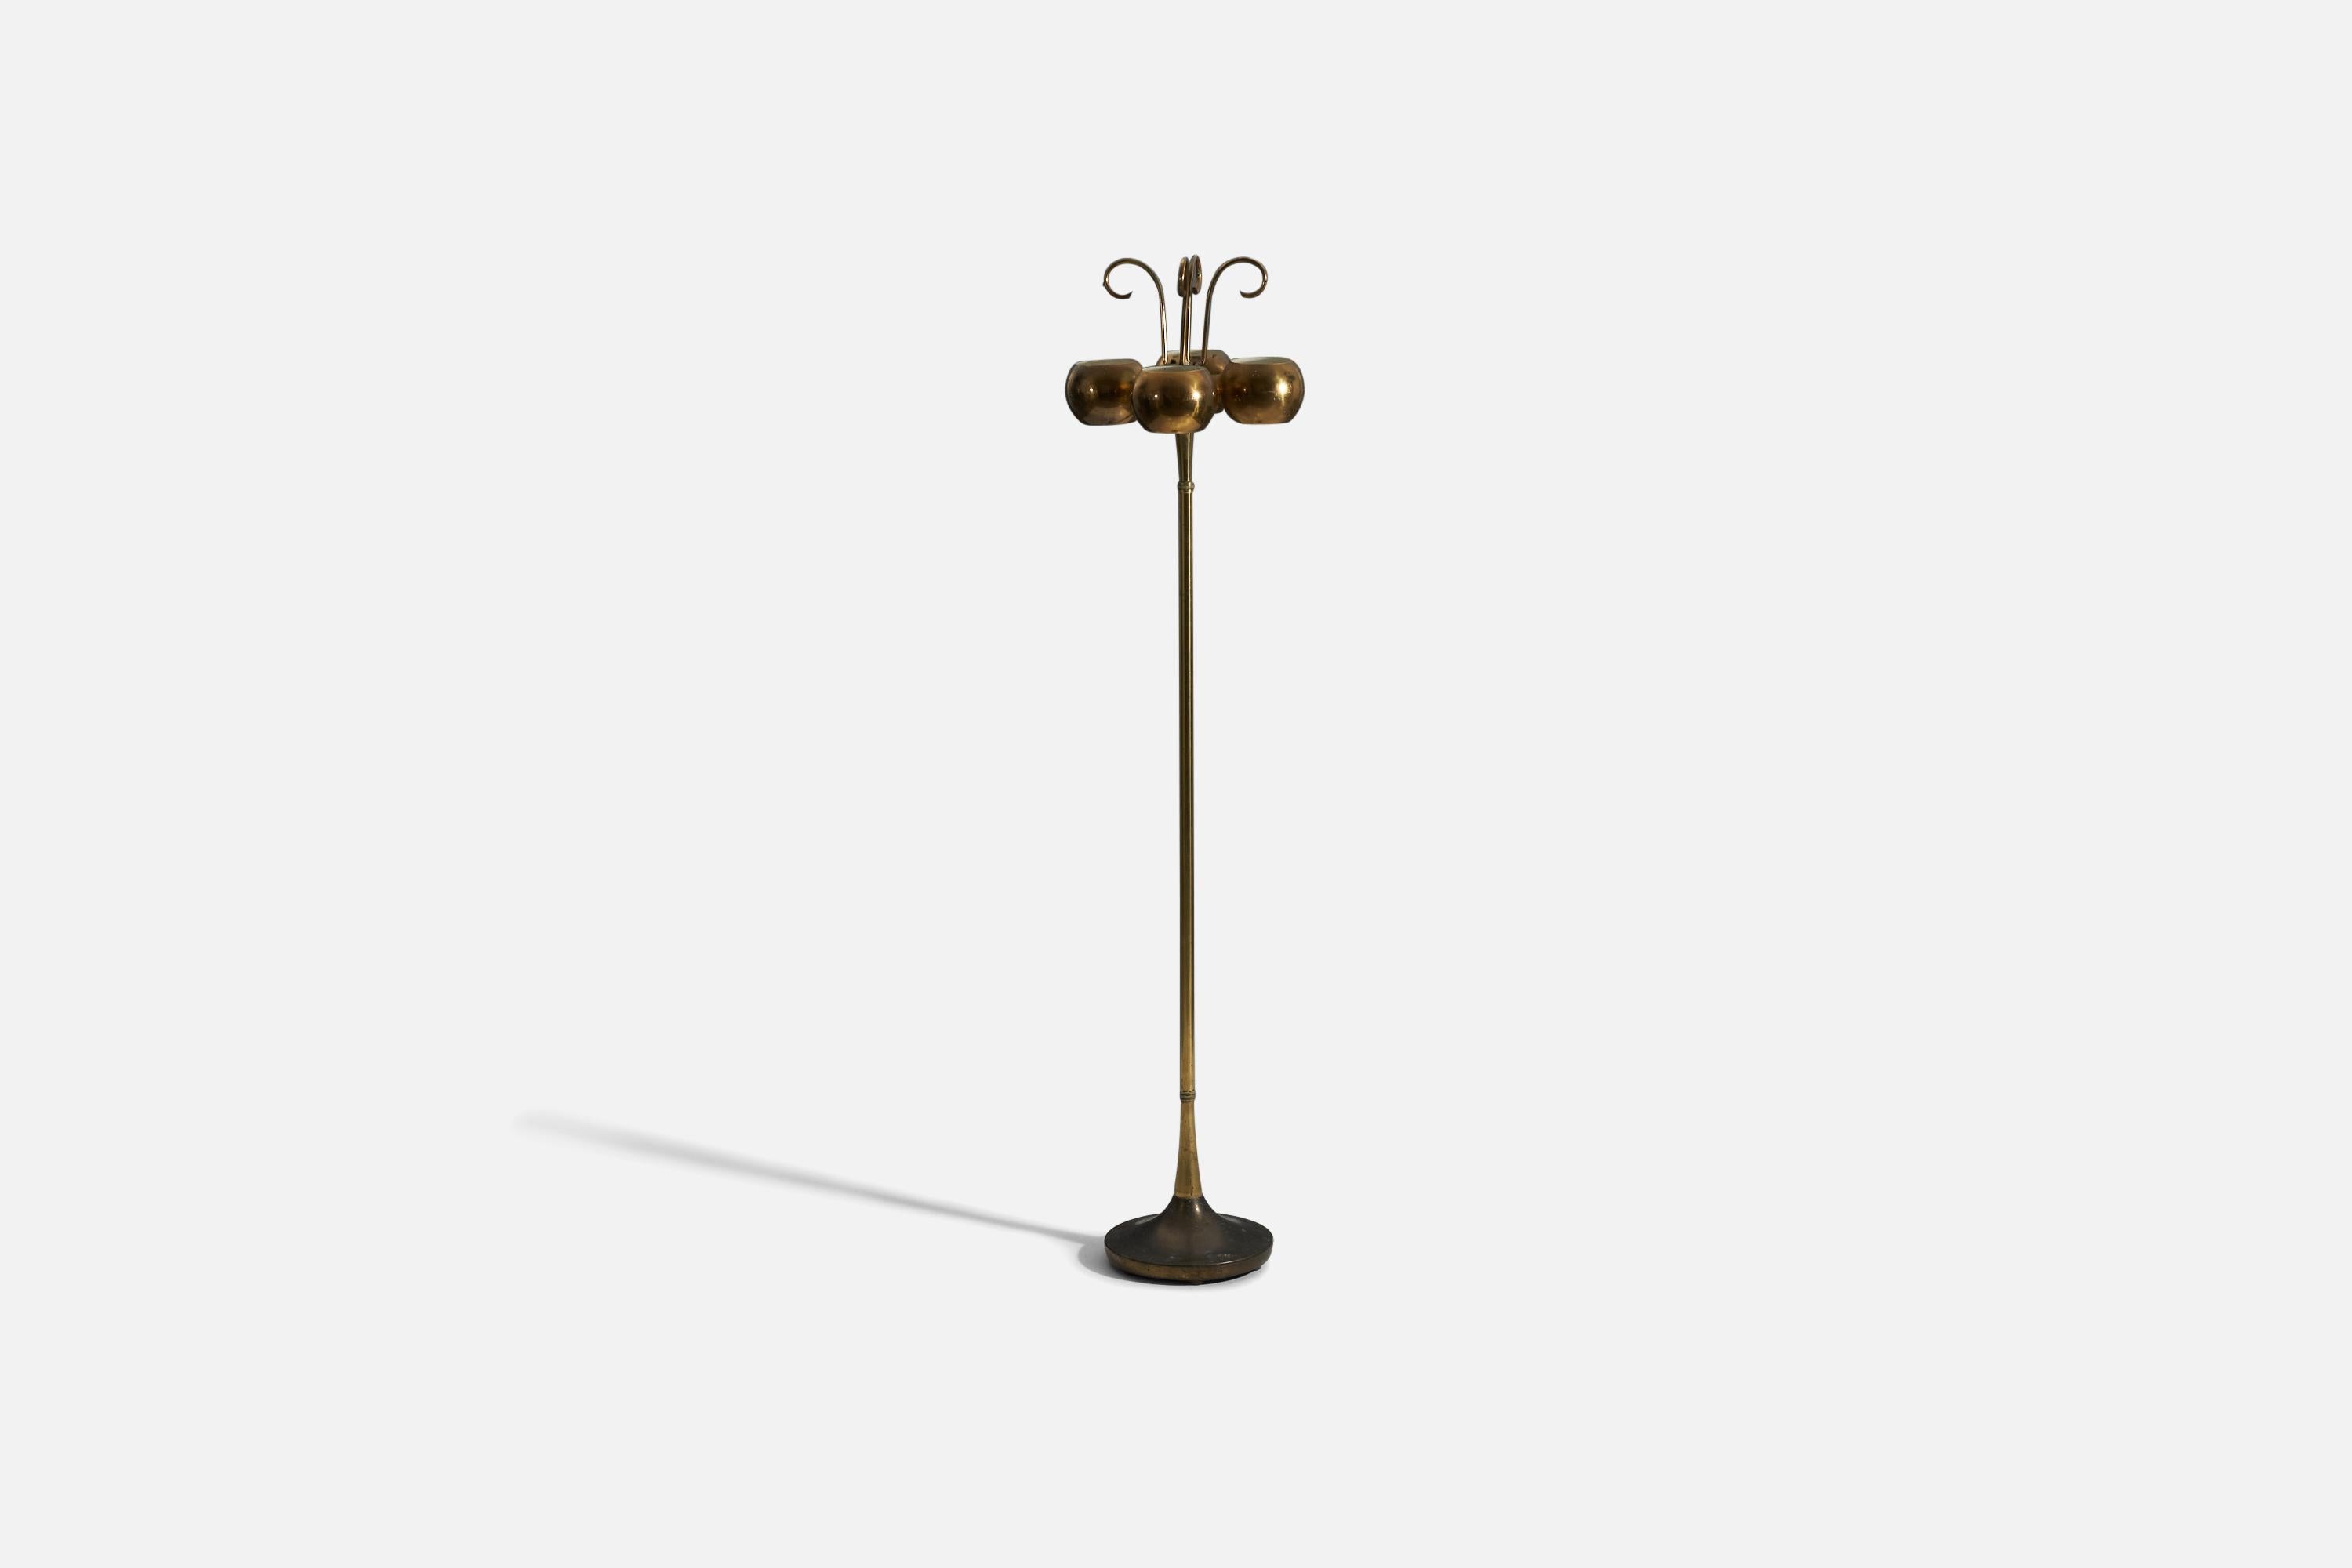 A brass floor lamp featuring four light sources and organic ornamentation, design and production attributed to Lightolier, United States 1950s.